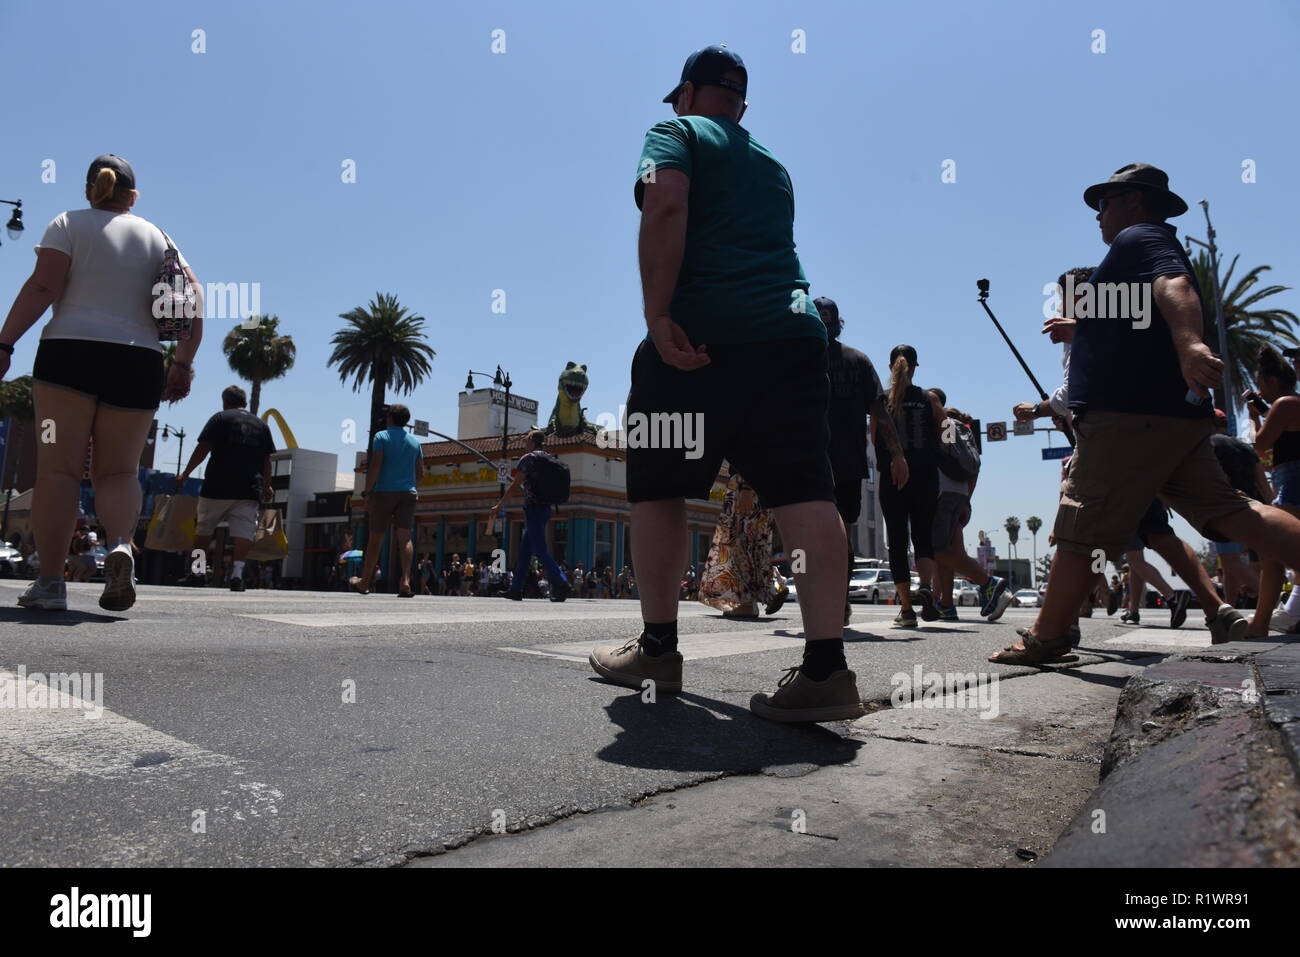 HOLLYWOOD - August 7, 2018: People crossing the road from low angle point of view on Hollywood blvd in Hollywood, CA. Stock Photo